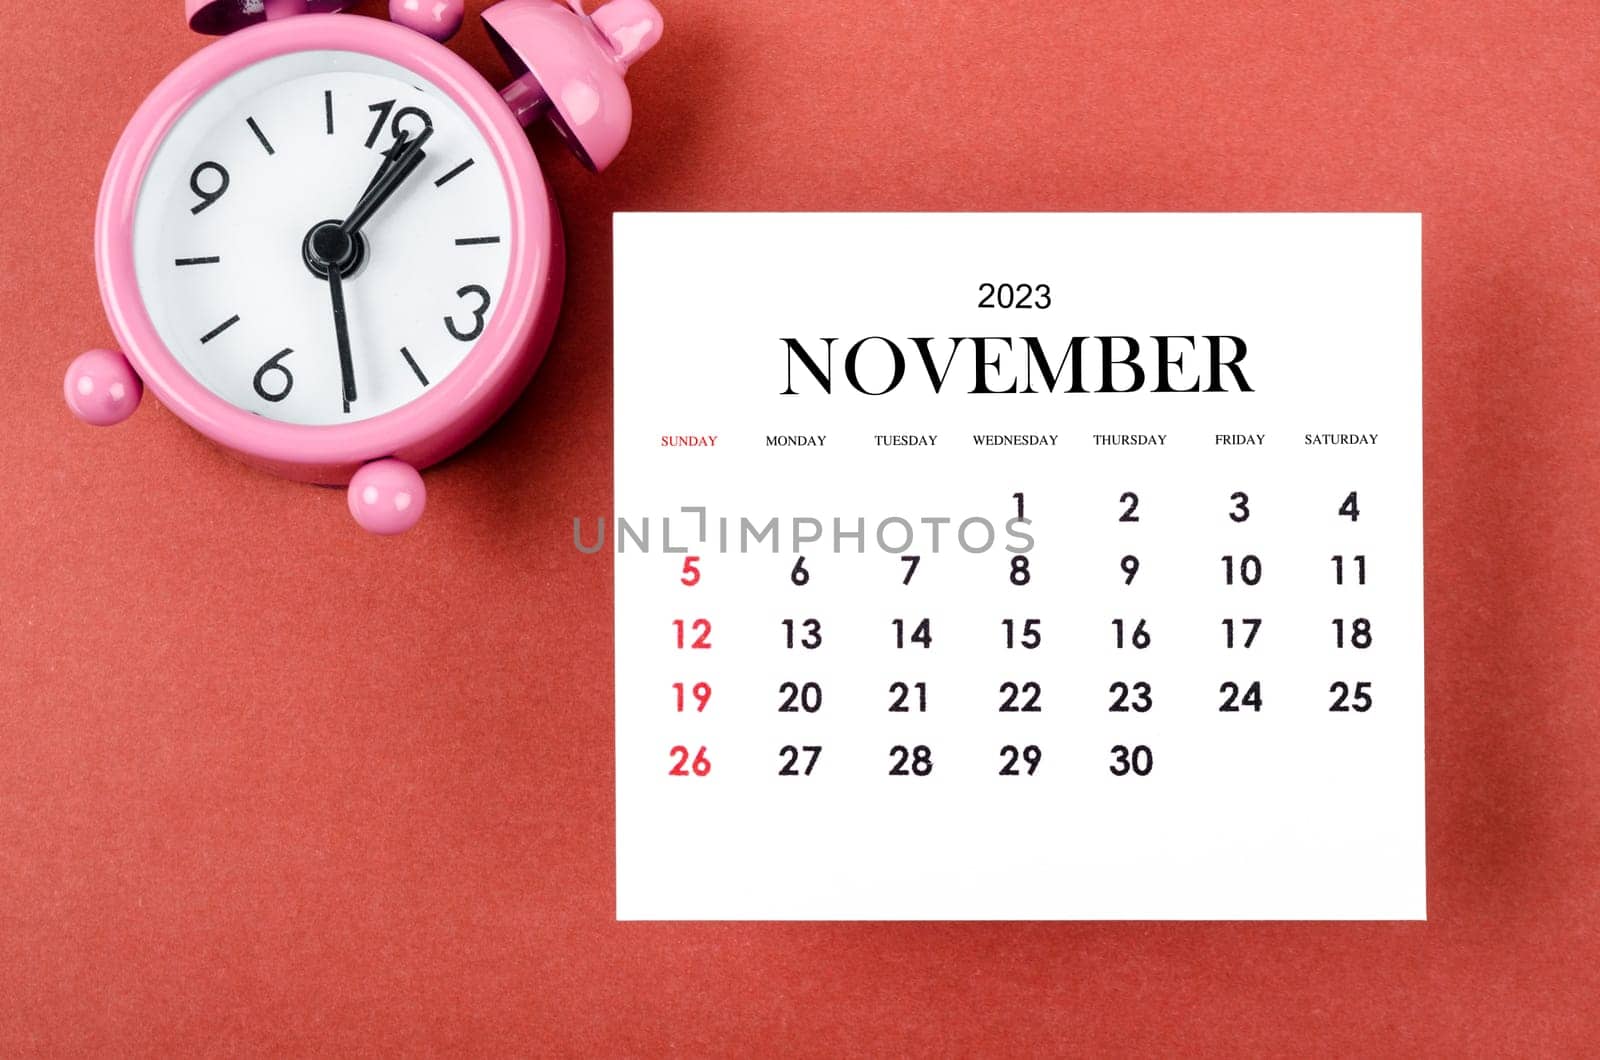 The November 2023 Monthly calendar year with alarm clock on red and black background. by Gamjai